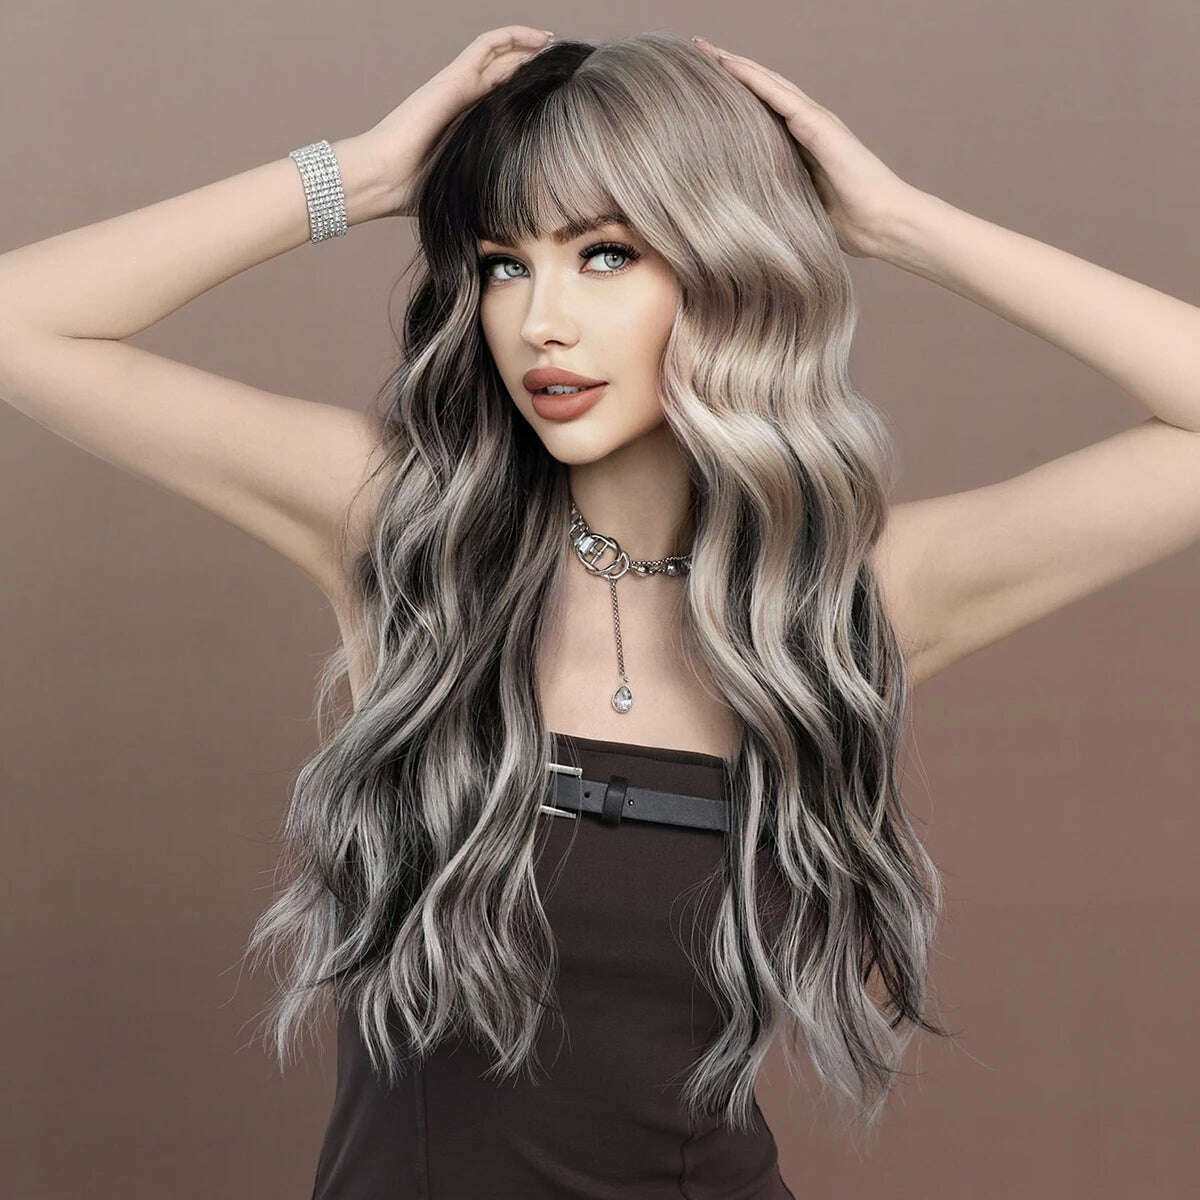 KIMLUD, 7JHH WIGS Long Body Wavy Silver Ash Hair Wig with Bangs for Women Daily Party High Density Hair Ombre Wigs Heat Resistant Fiber, KIMLUD Womens Clothes